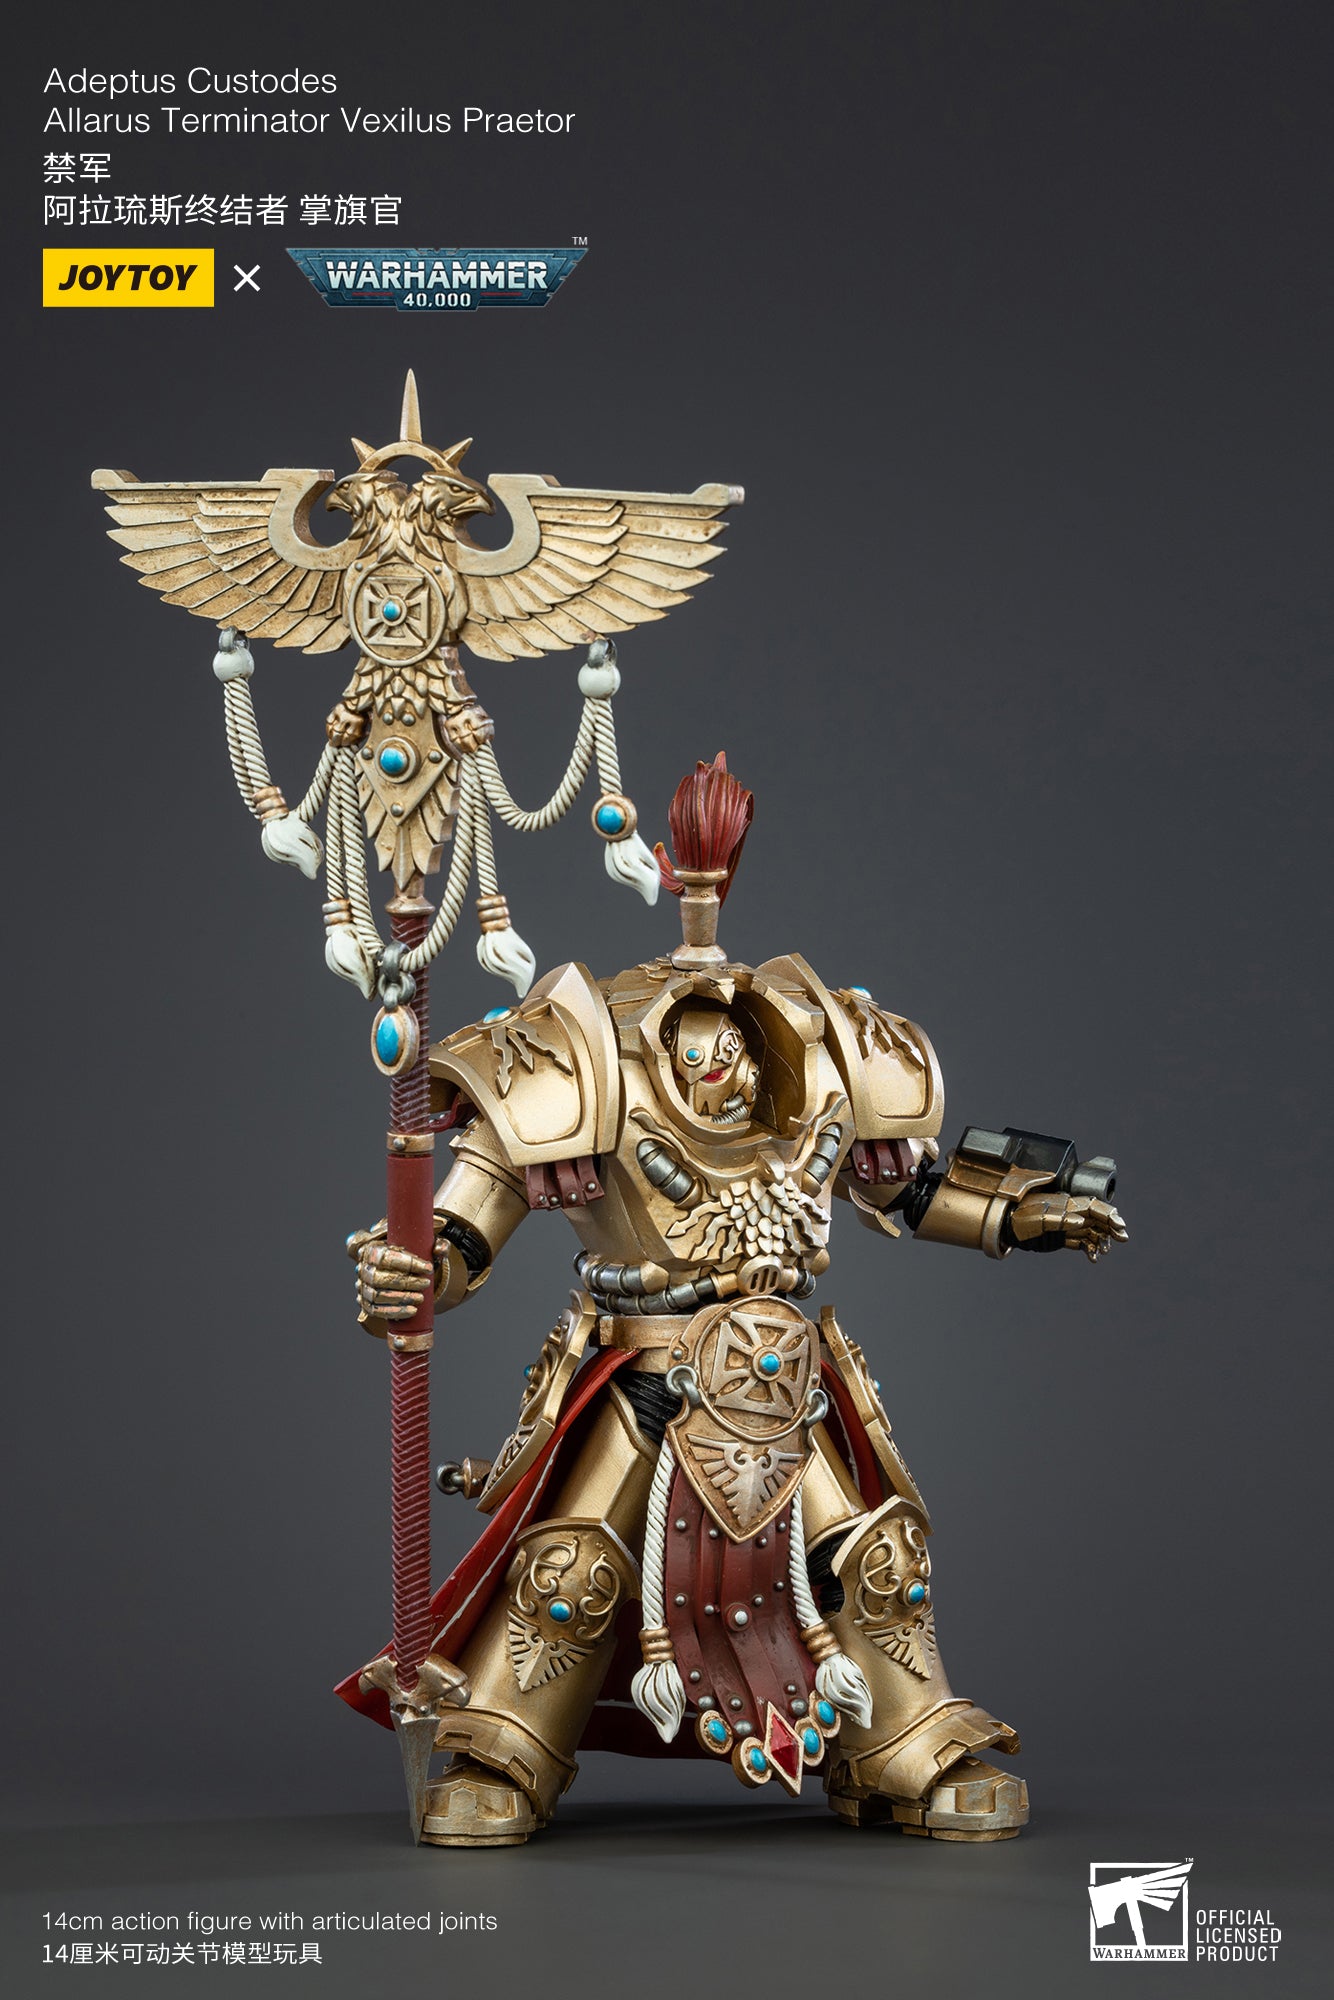 Joy Toy brings Adeptus Custodes Allarus Terminator Vexilus Praetor 1/18 scale figures. JoyToy each figure includes interchangeable hands and weapon accessories and stands between 4" and 6" tall.